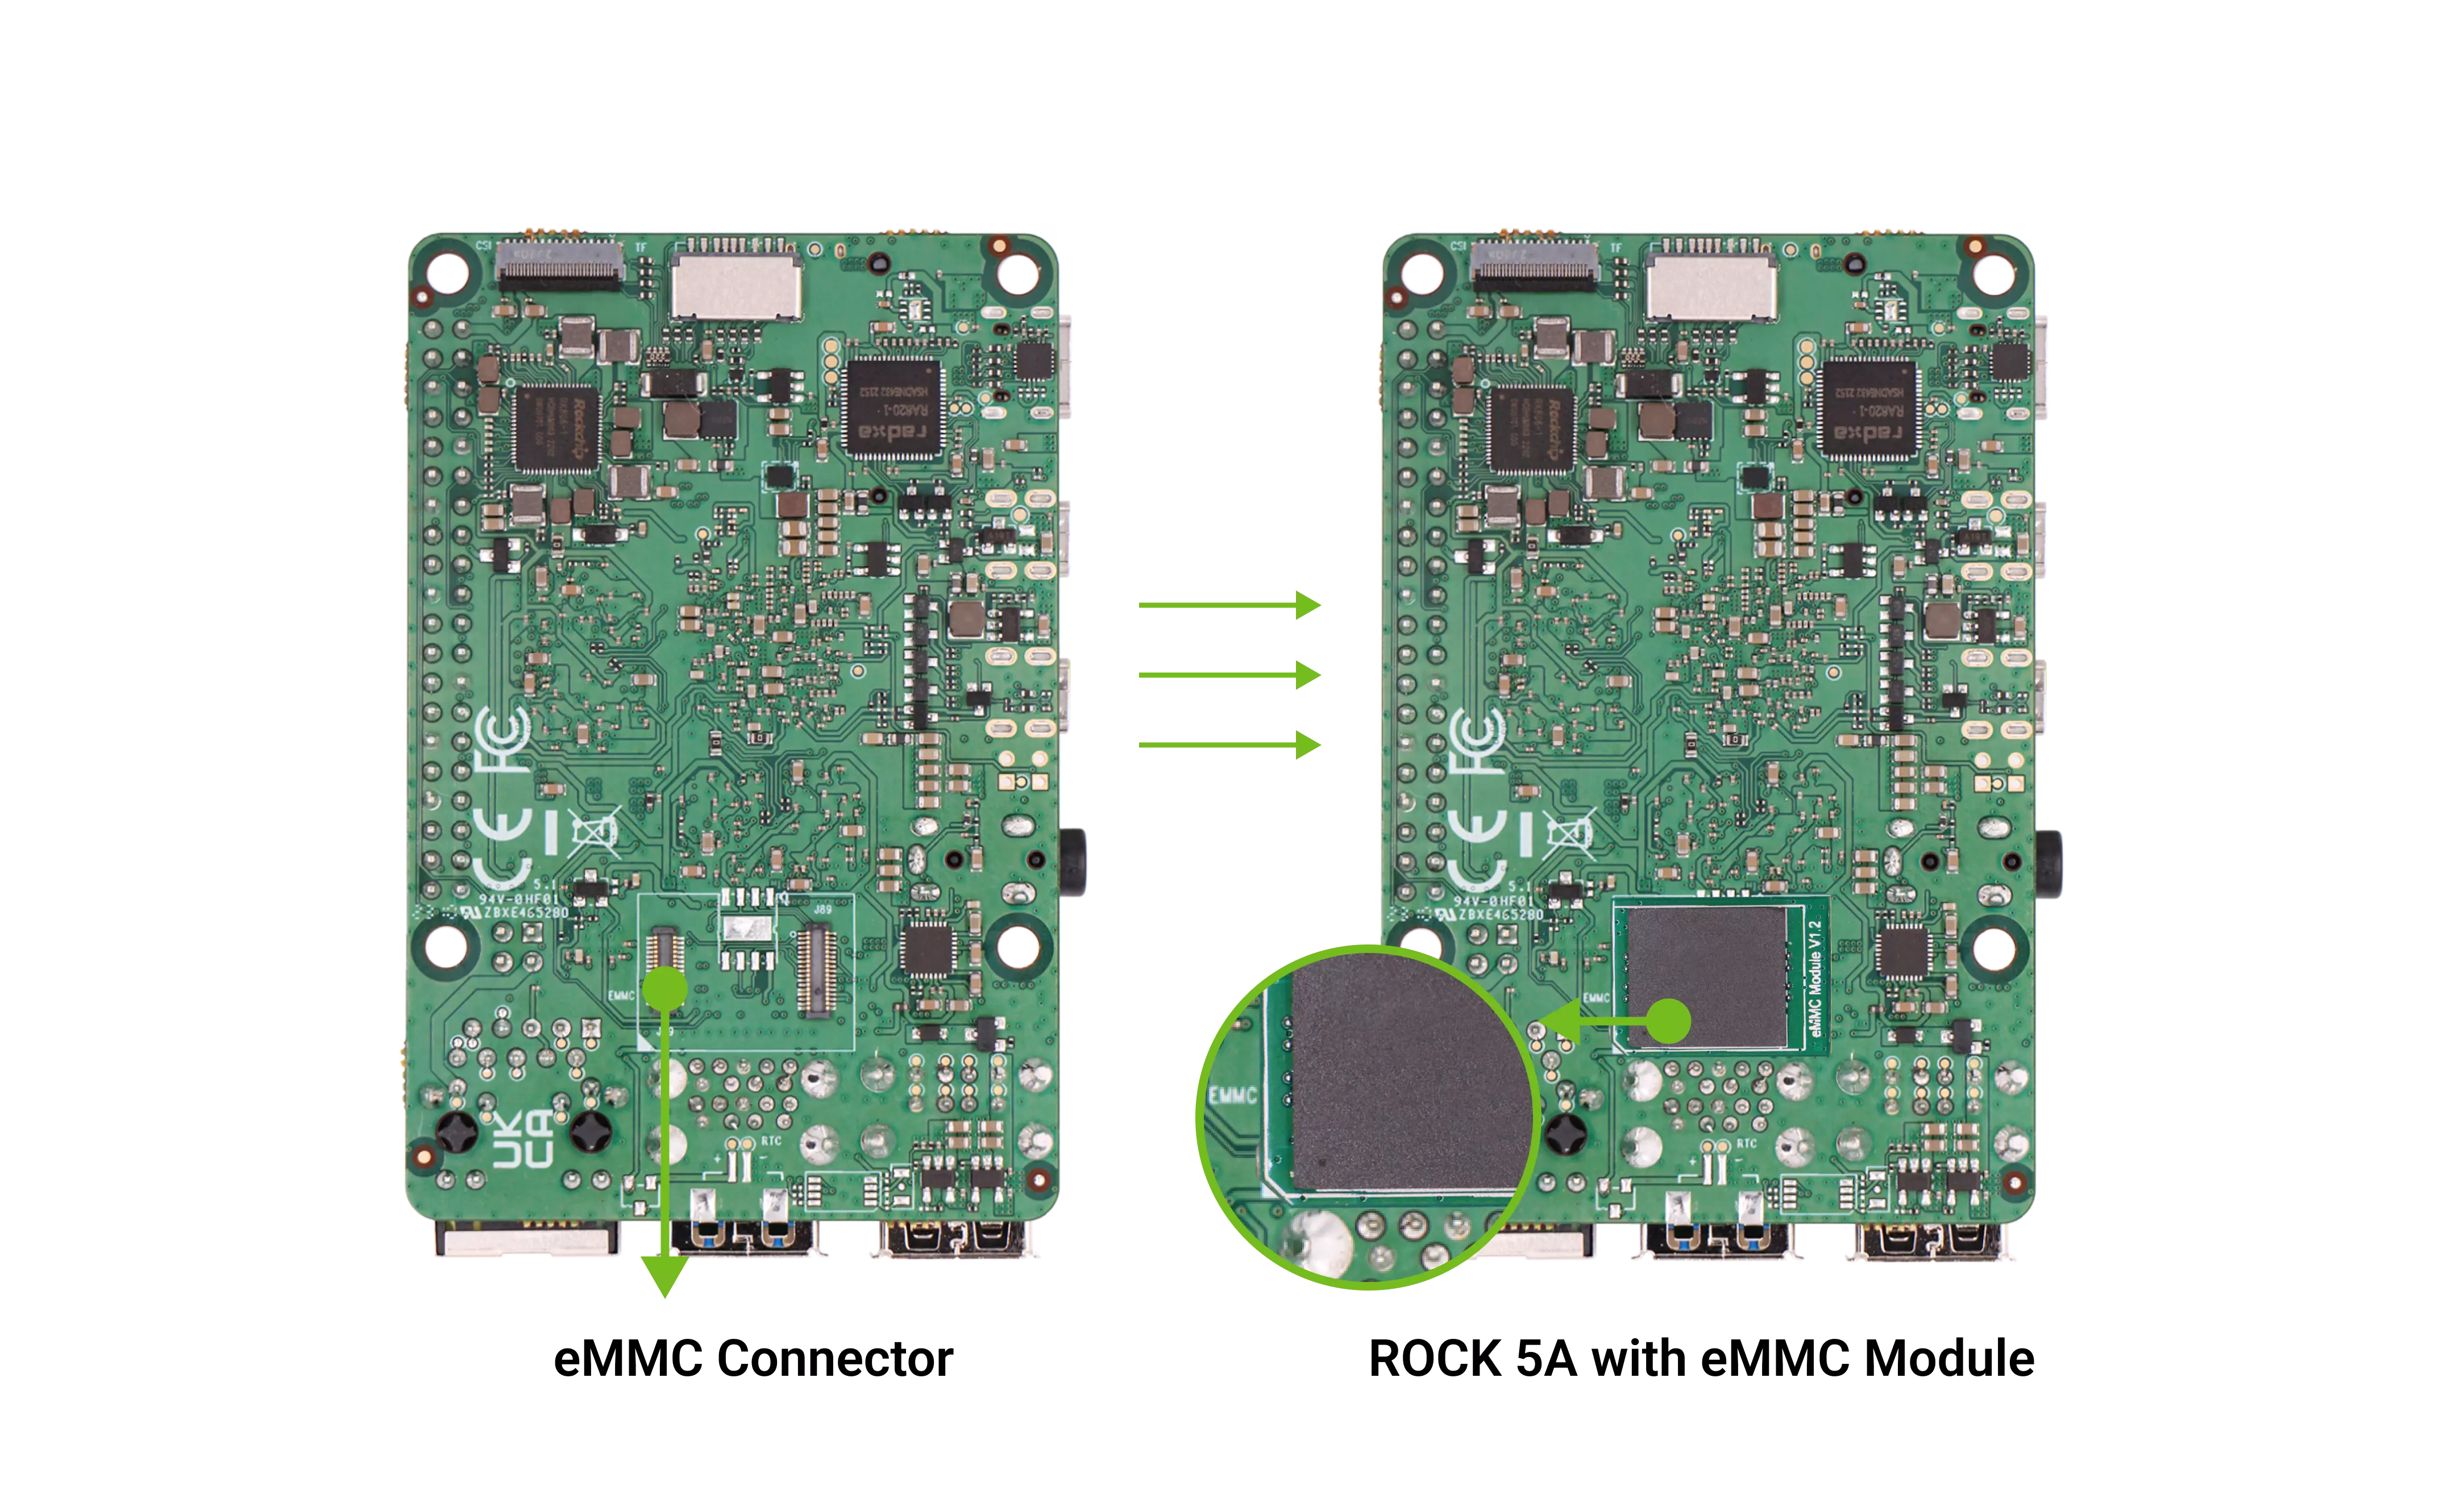 Universal Compatibility Radxa SBCs with eMMC Connector Supported